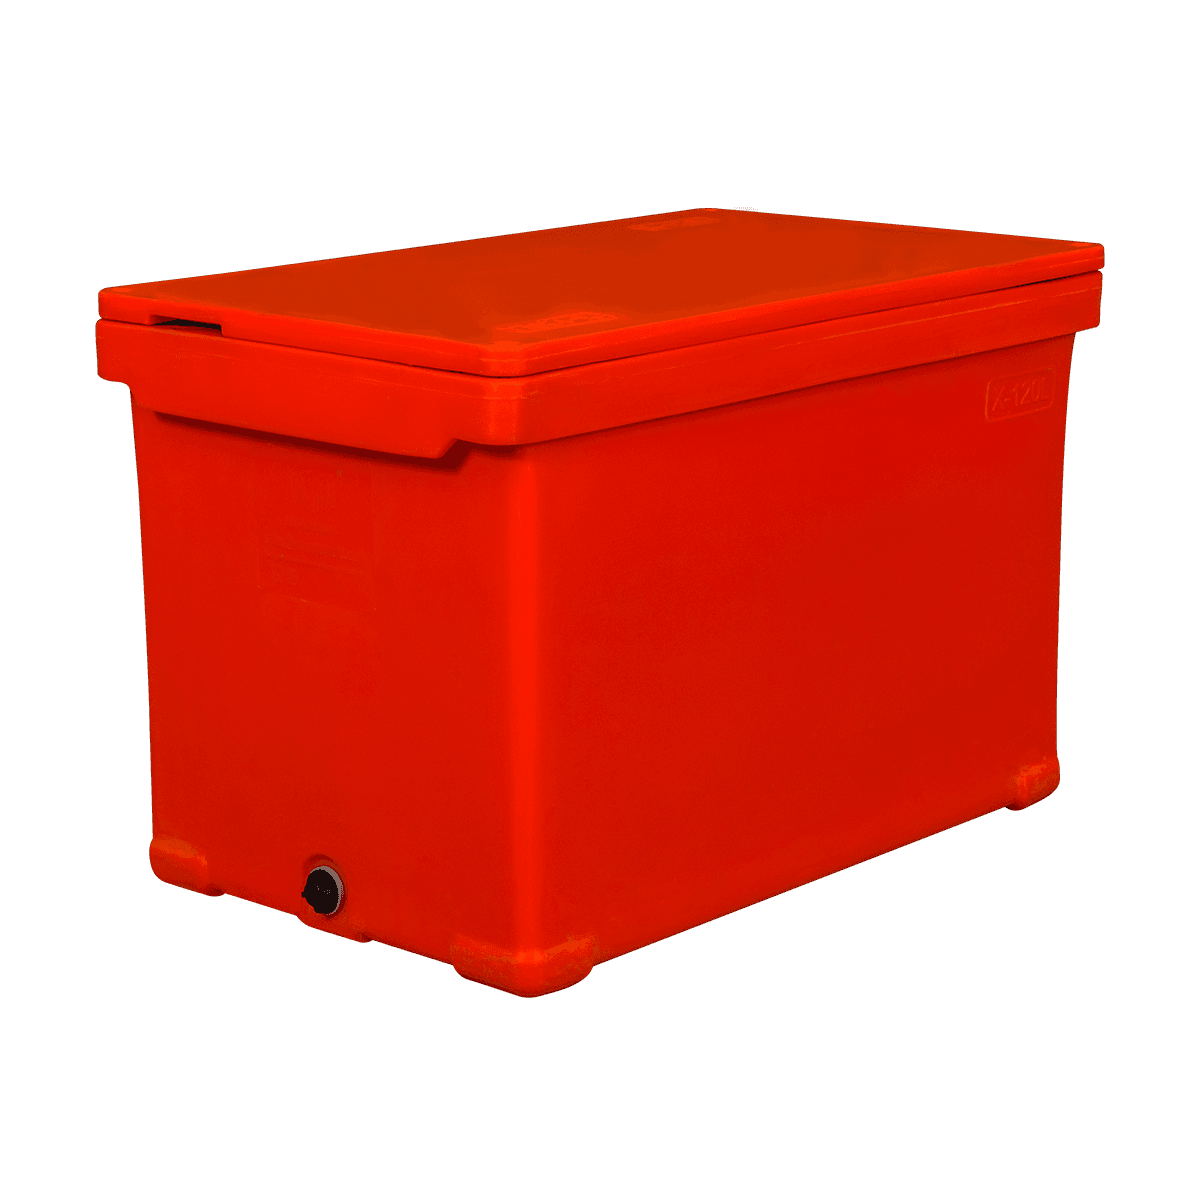 What Do I Need To Prepare For Shipping In Live Fish Transportation Containers?